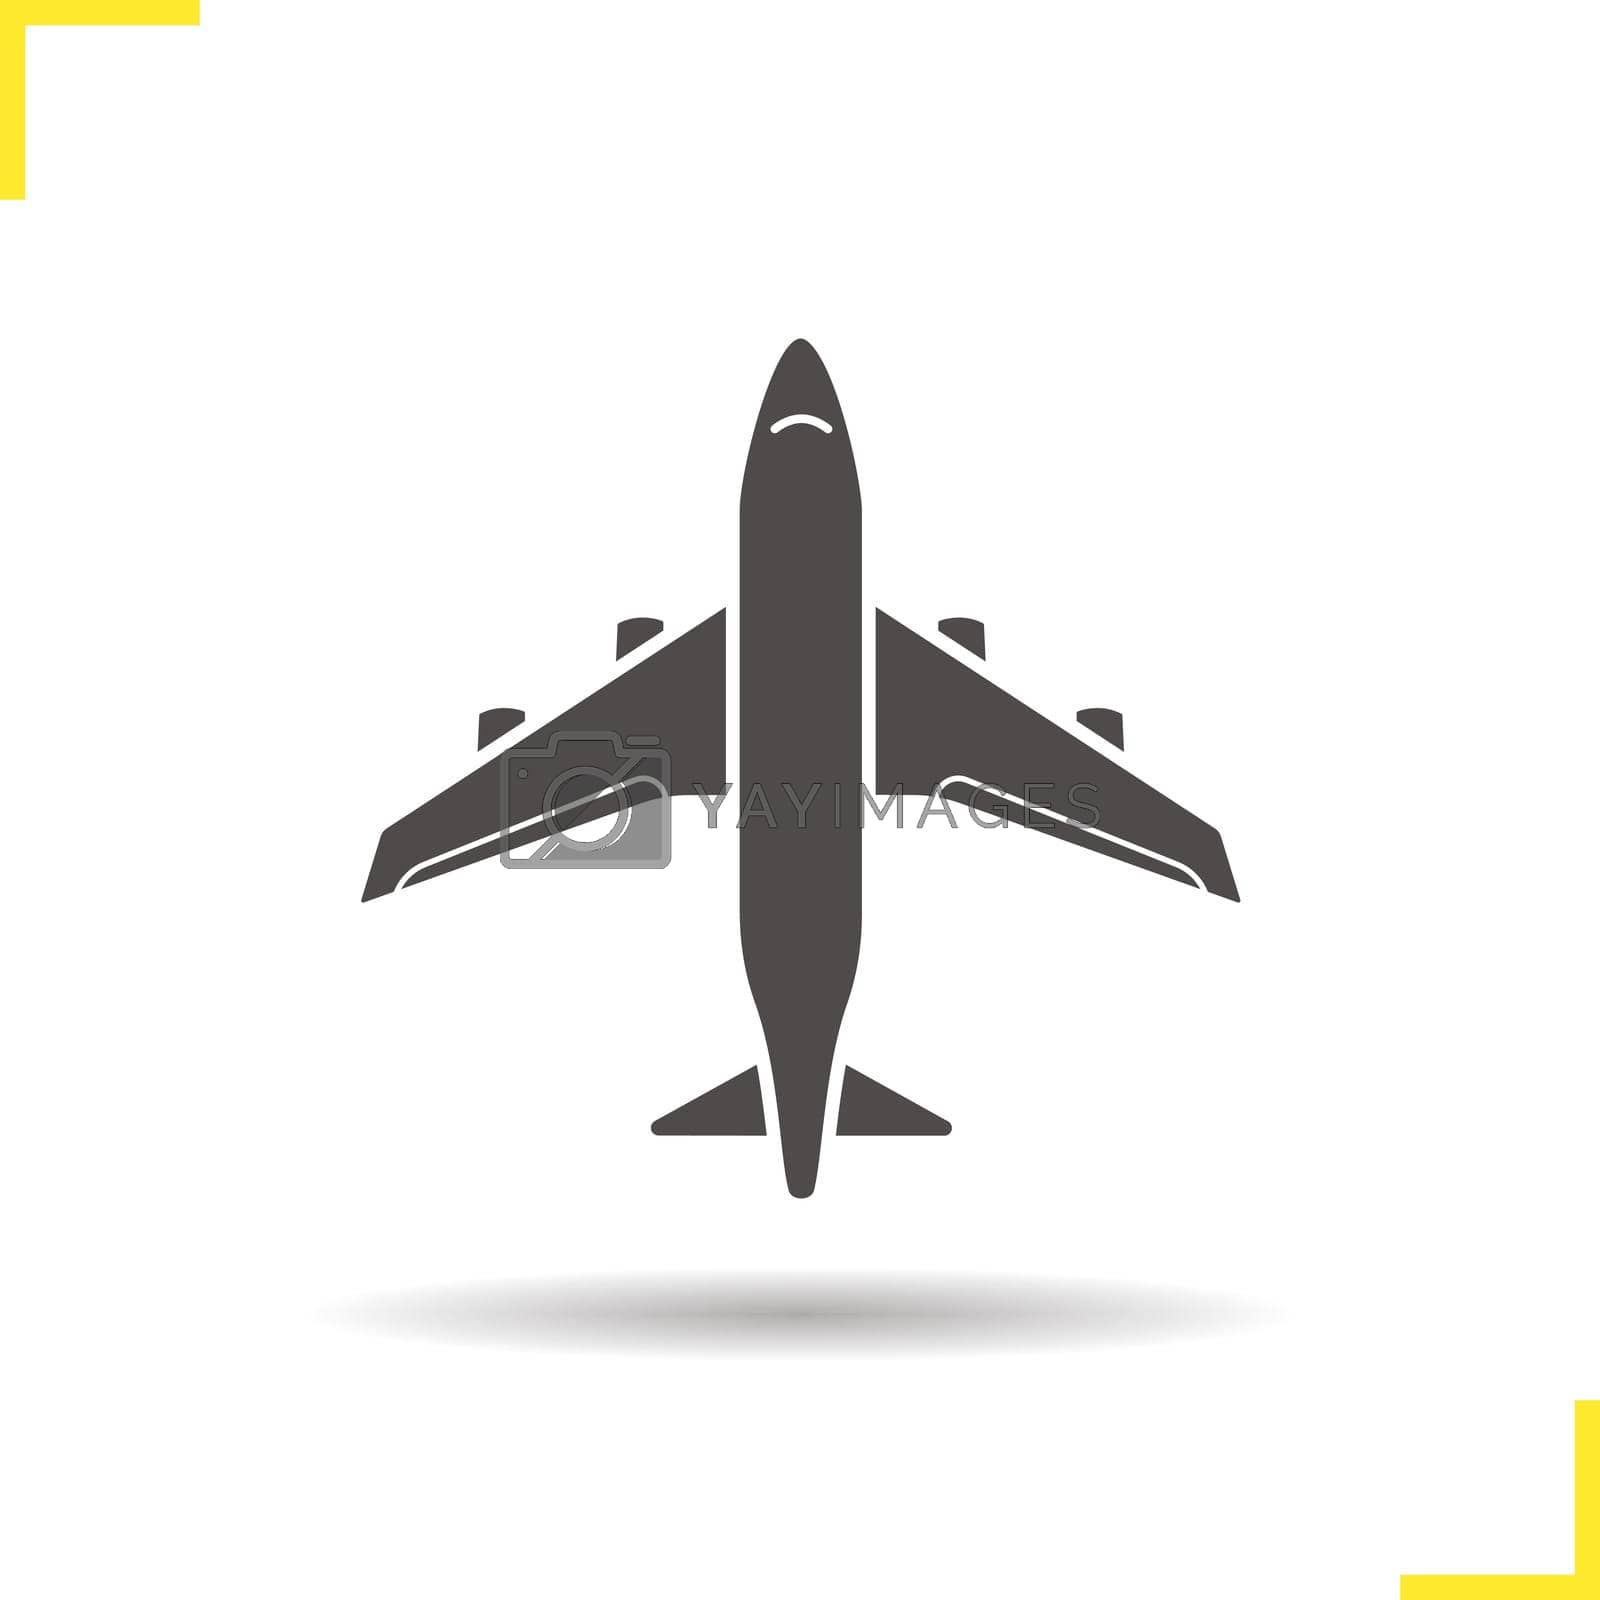 Plane icon. Drop shadow flight silhouette symbol. Airplane. Negative space. Vector isolated illustration